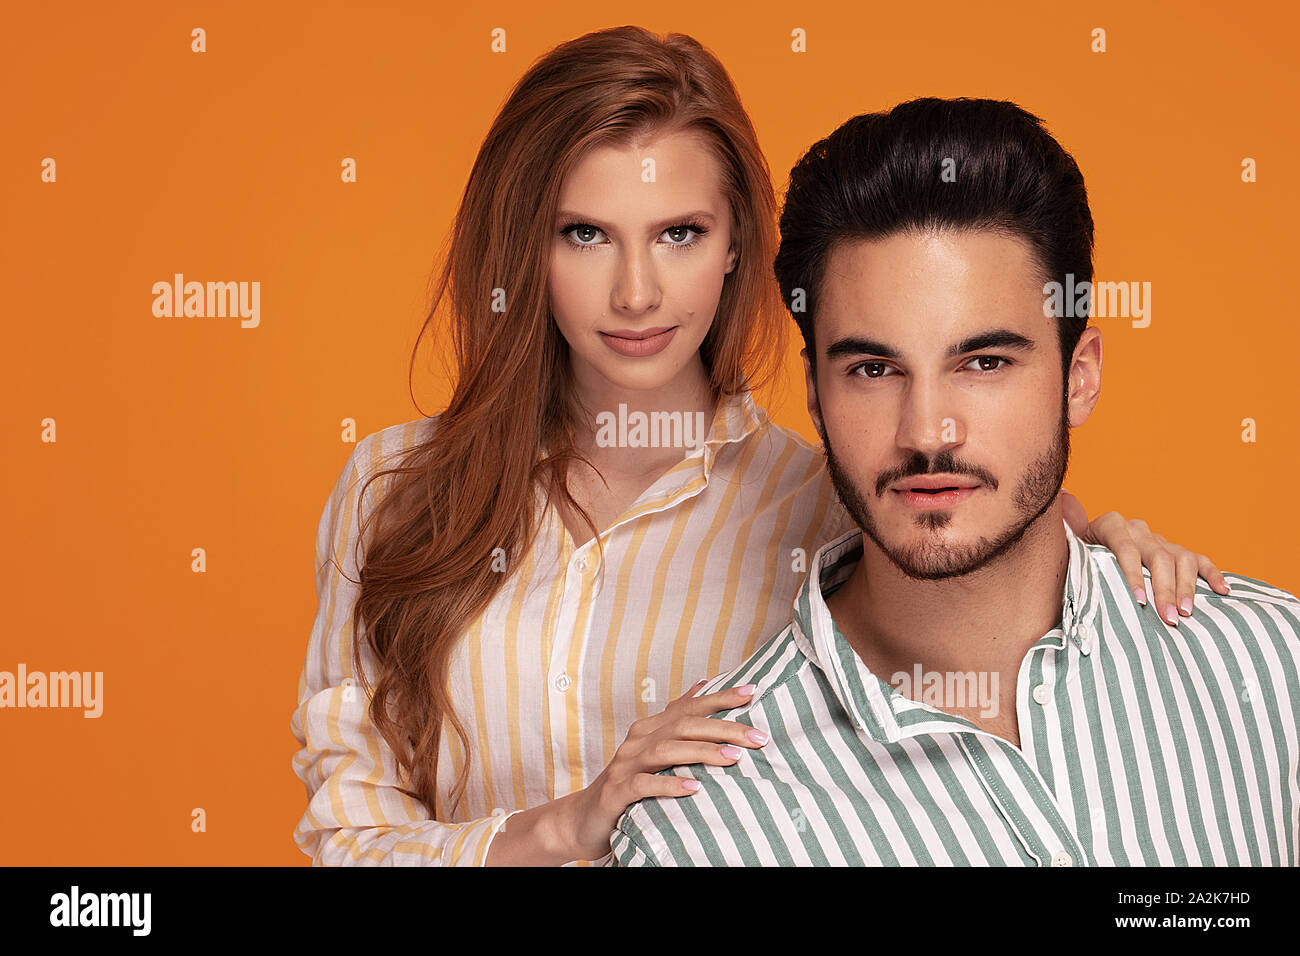 Beautiful young couple posing together on yellow studio background. Facial expression, human emotions concept. Stock Photo